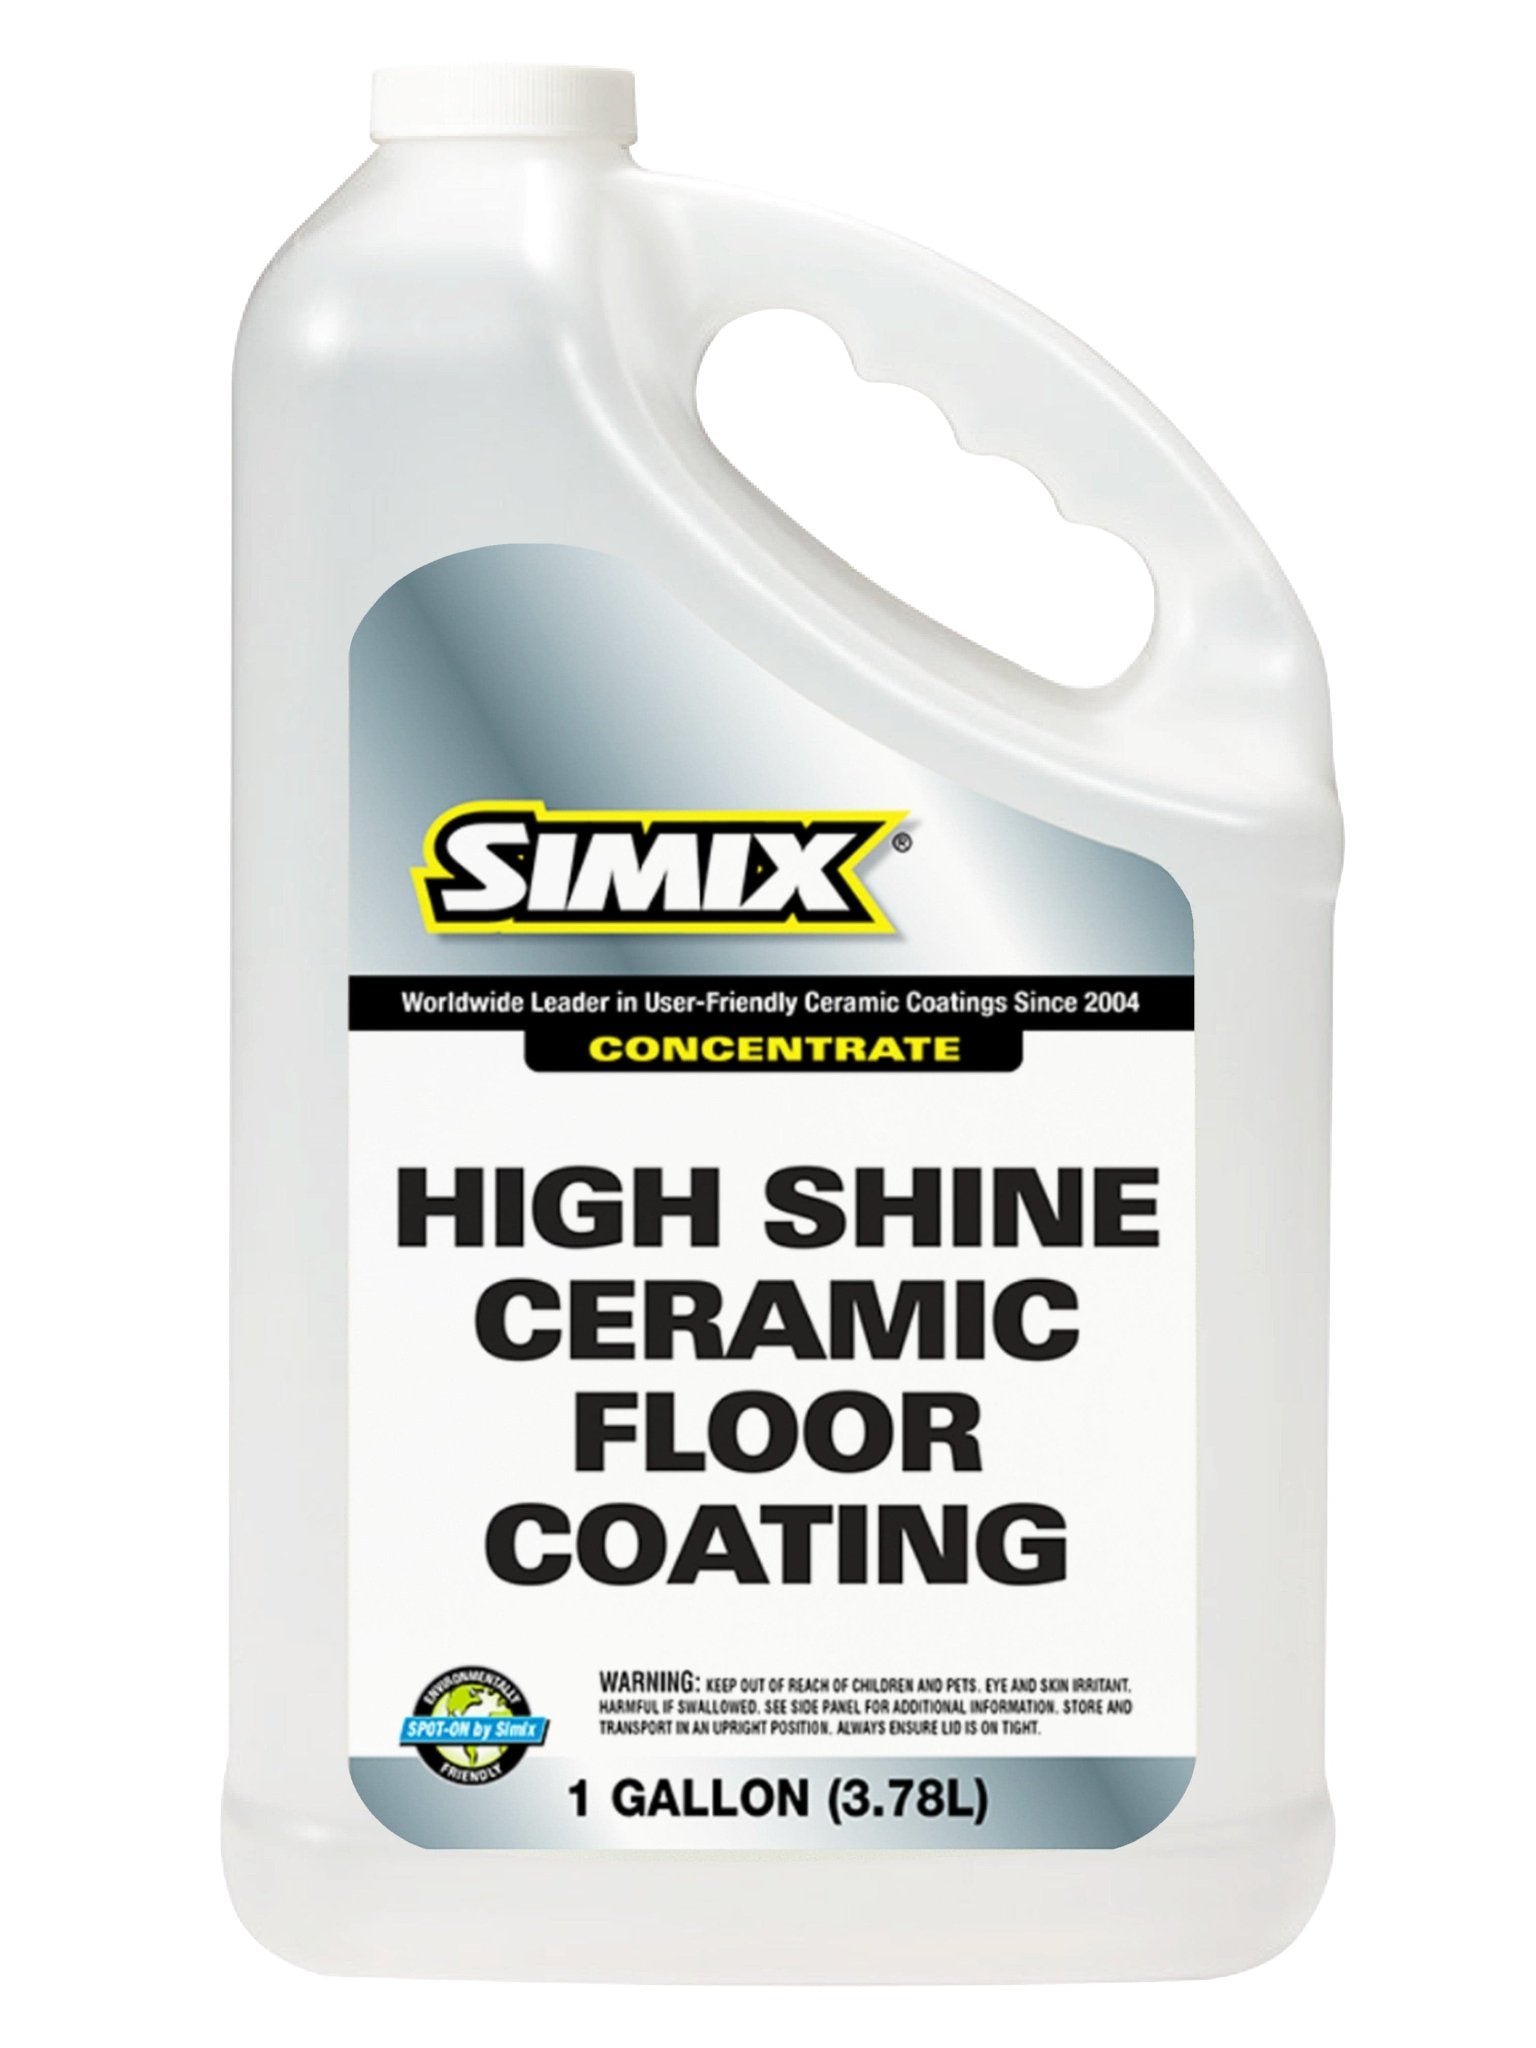 High Shine Ceramic Floor Coating - Xtreme Polishing Systems: concrete sealers, concrete floor sealers, and floor sealers.